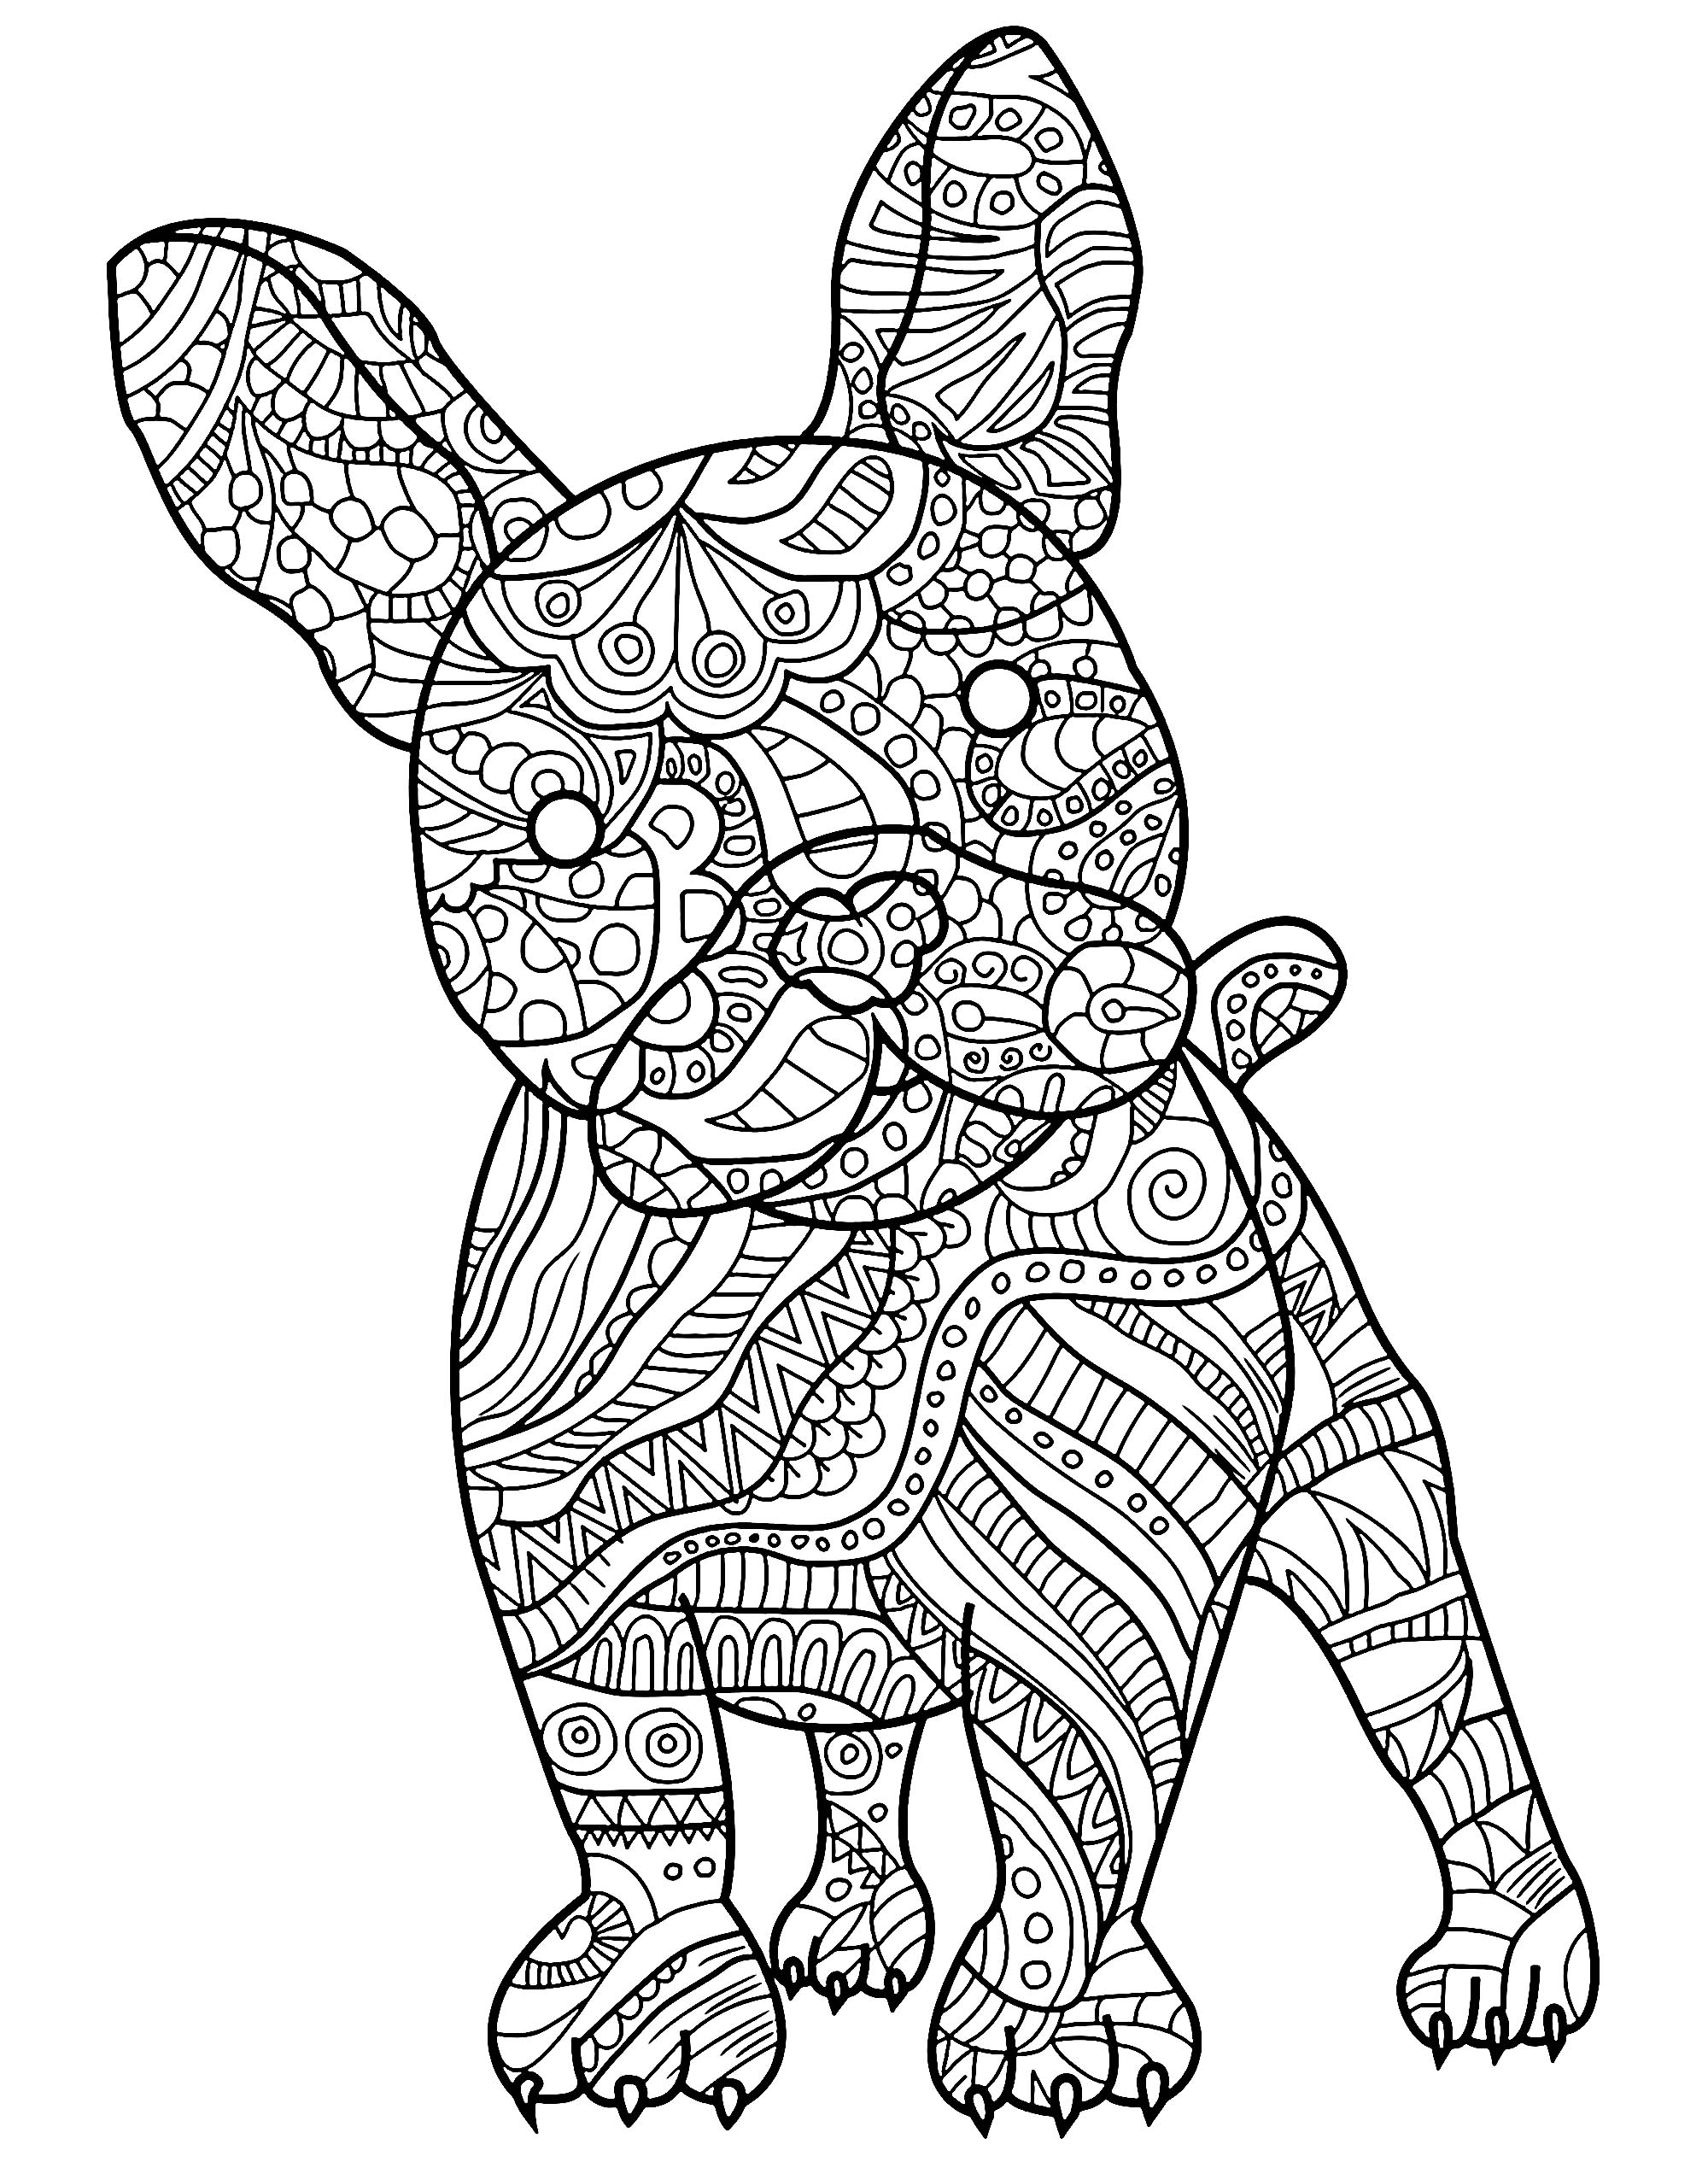 dog-to-download-for-free-dogs-kids-coloring-pages